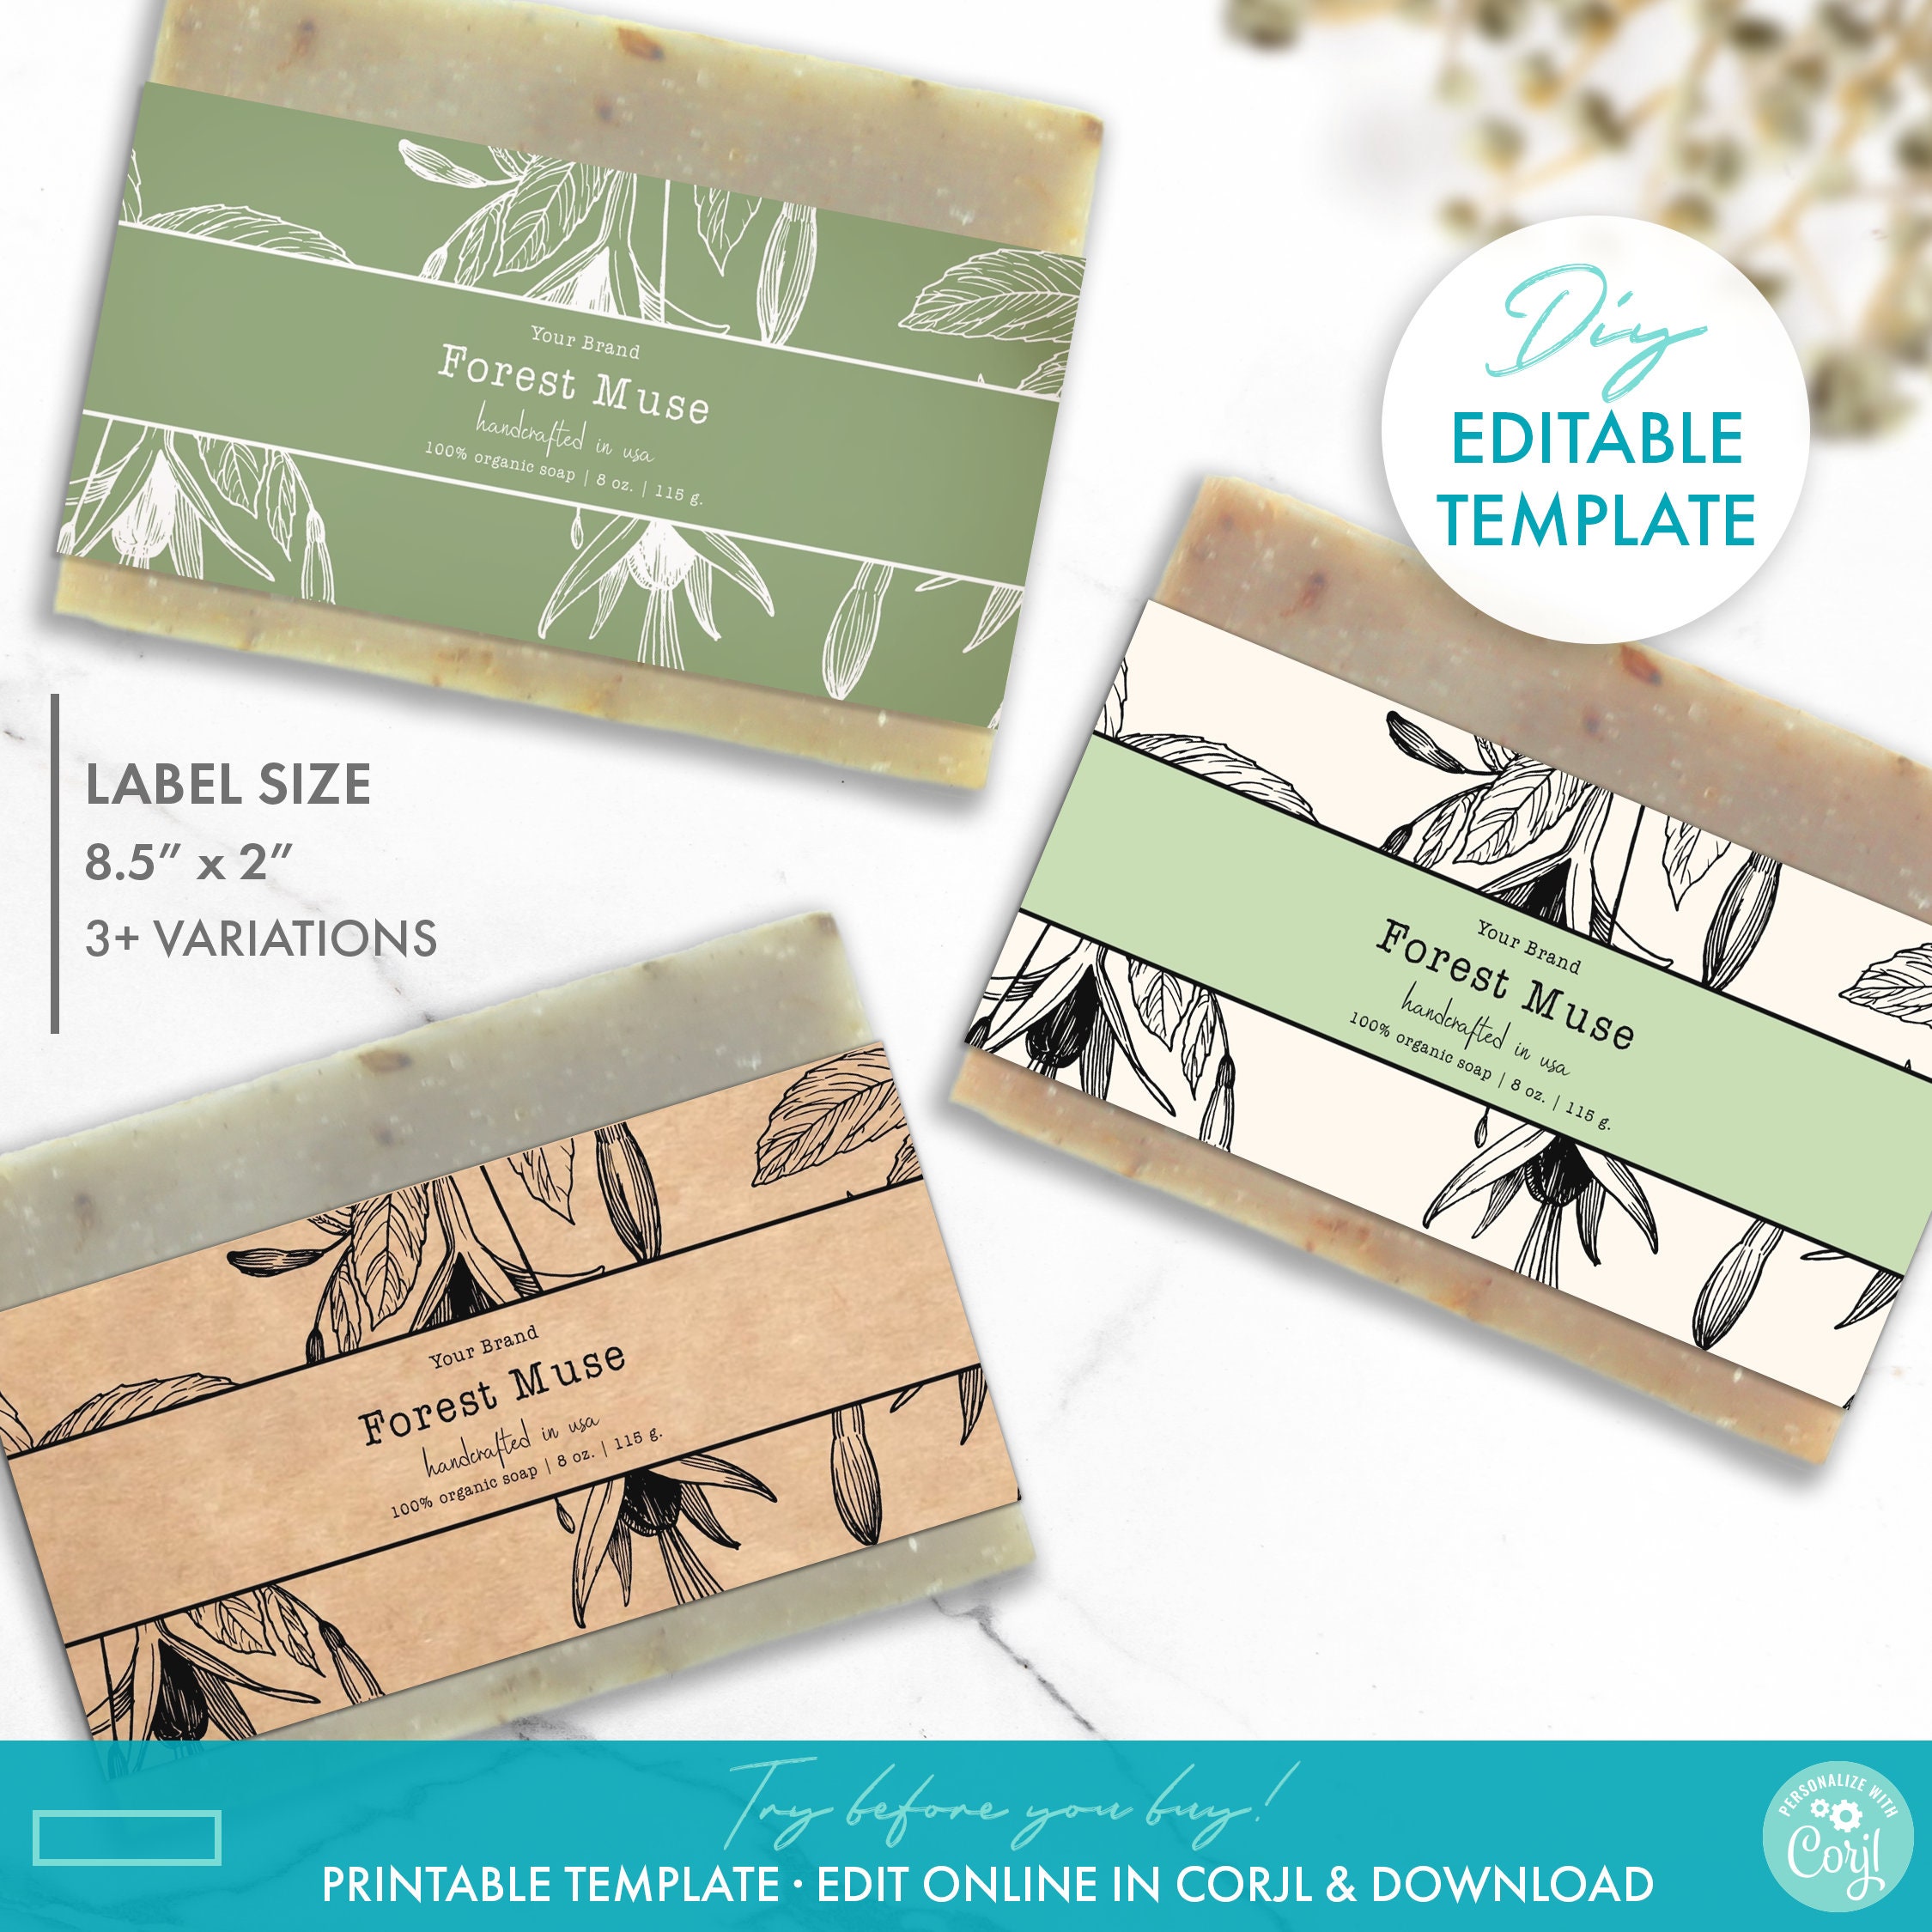 How to Wrap Soap 3 Different Ways + Sample Bar Packaging & Labels